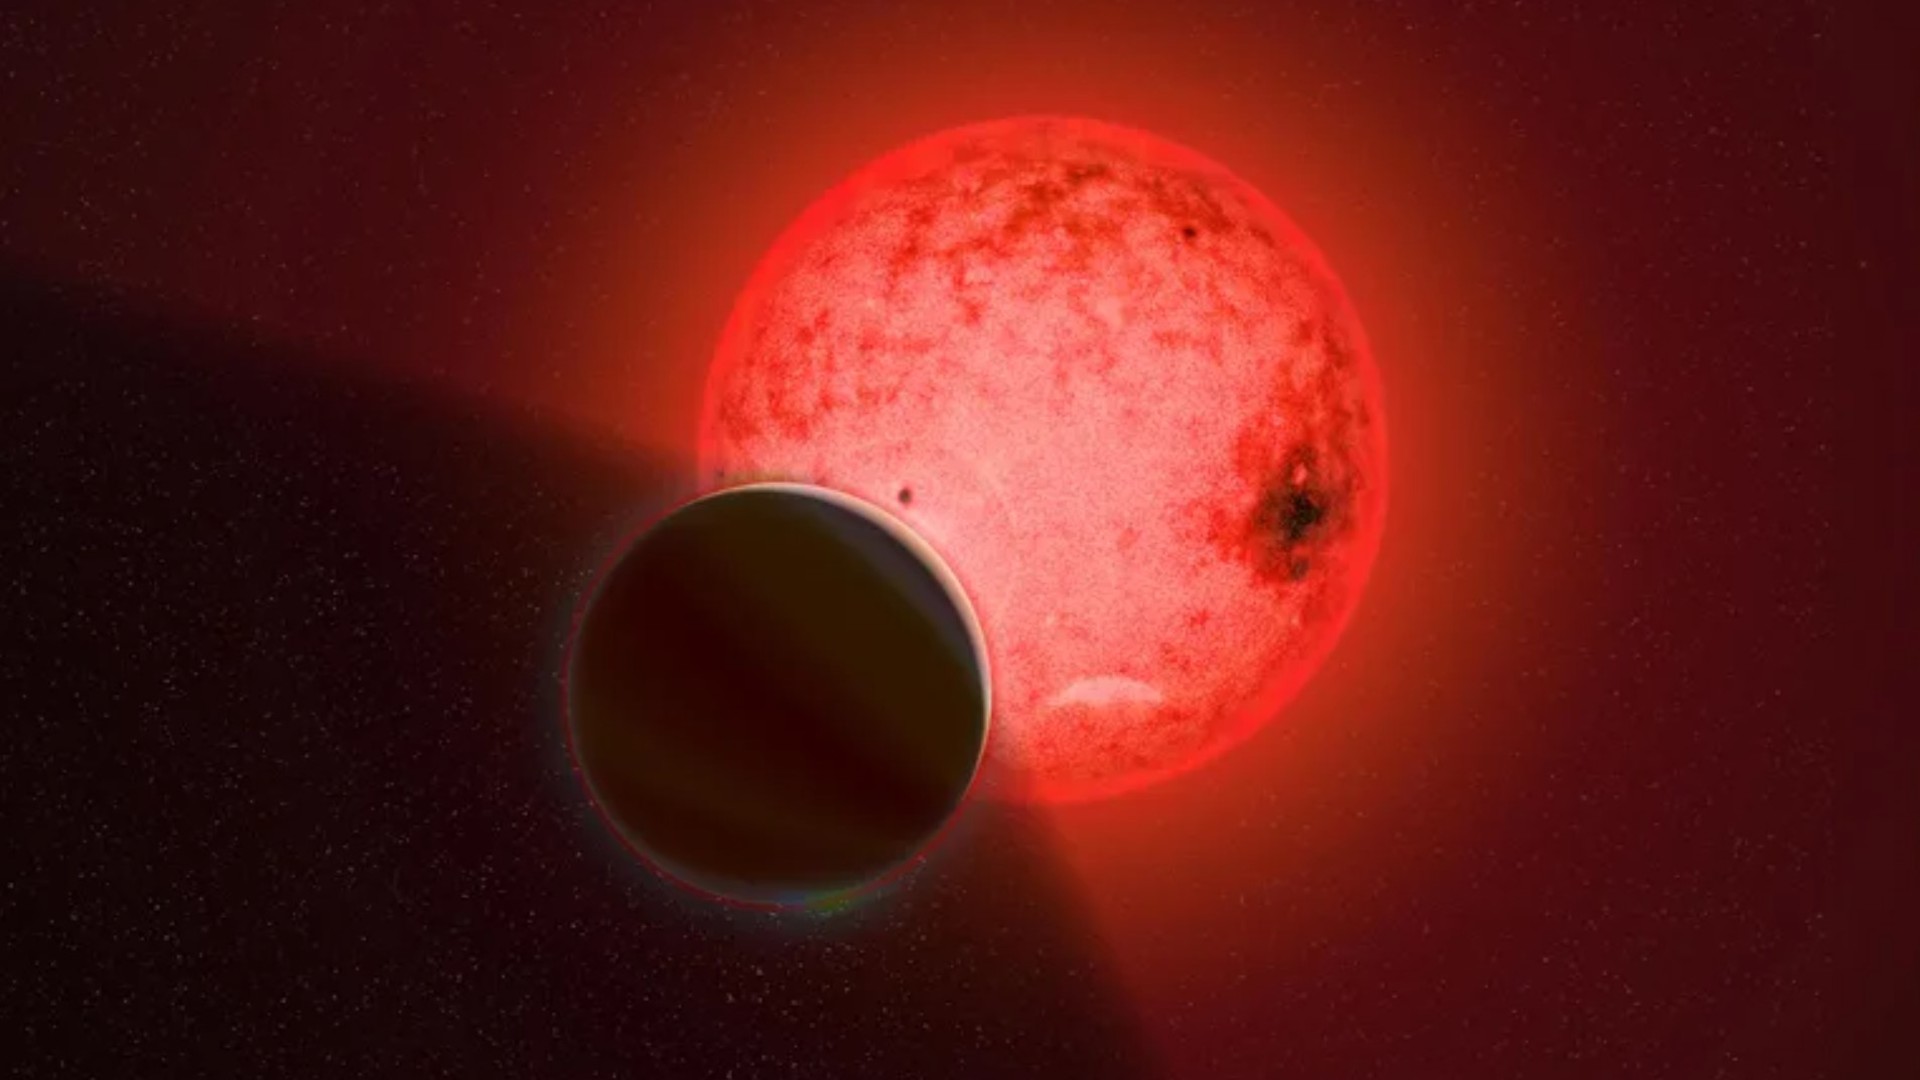 Massive 'forbidden planet' orbits a strangely tiny star only 4 times its size